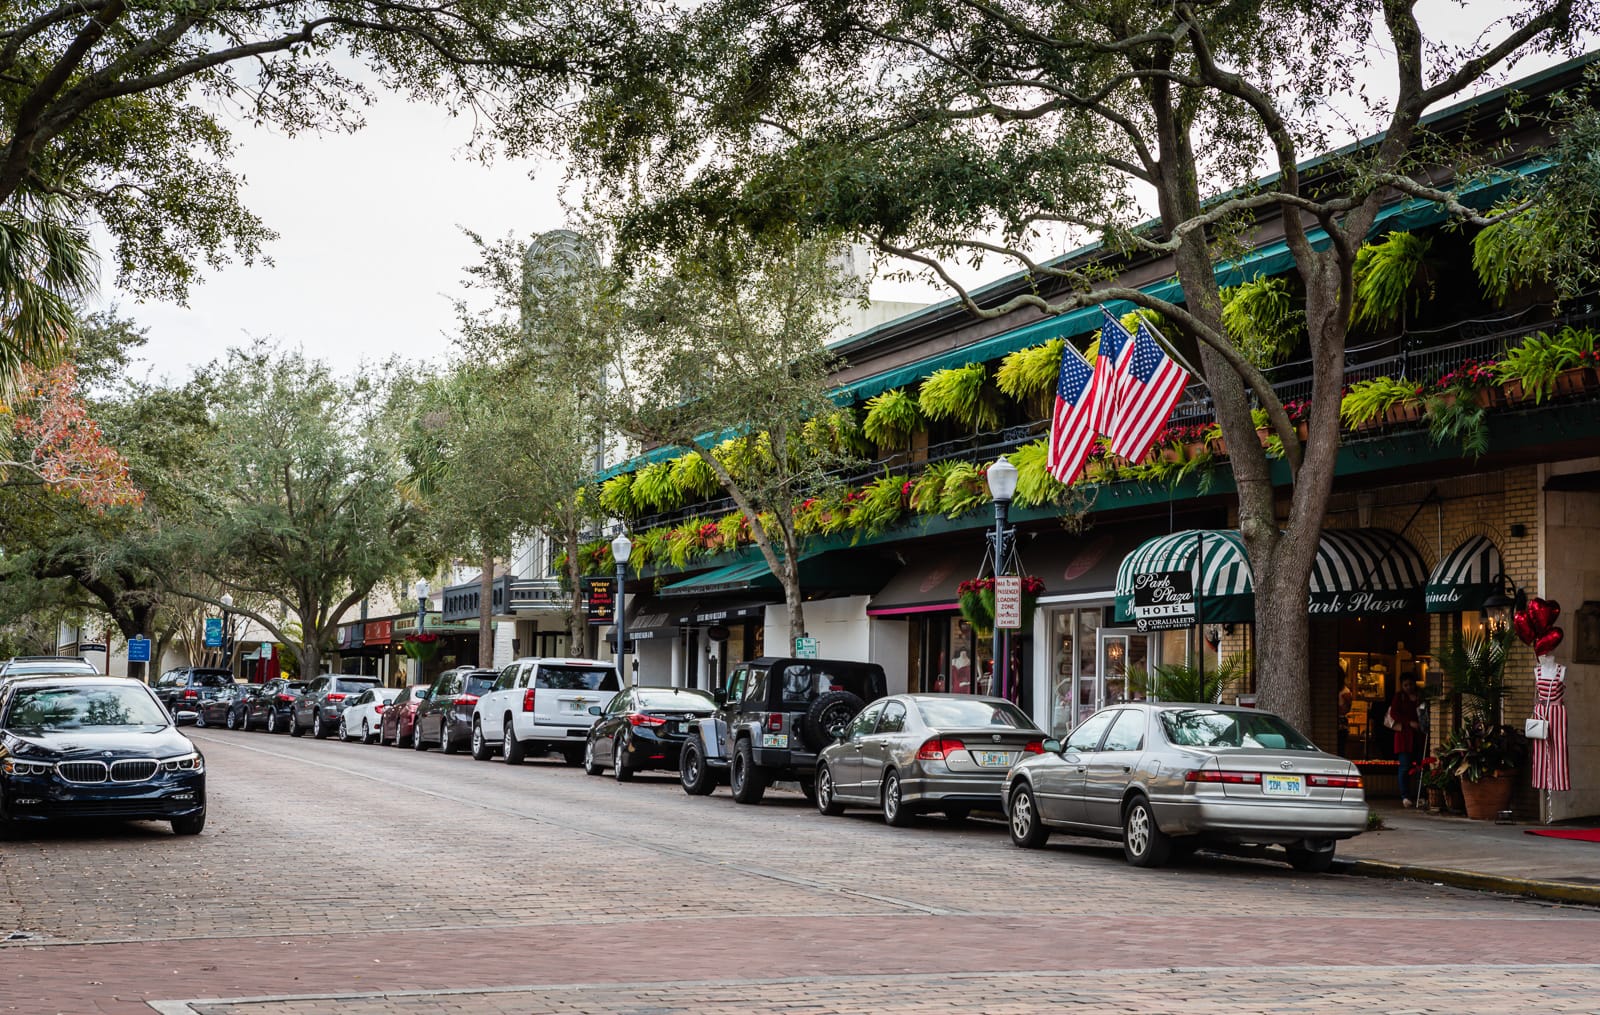 Winter Park FL is high on our list of things to do in Orlando besides theme parks.